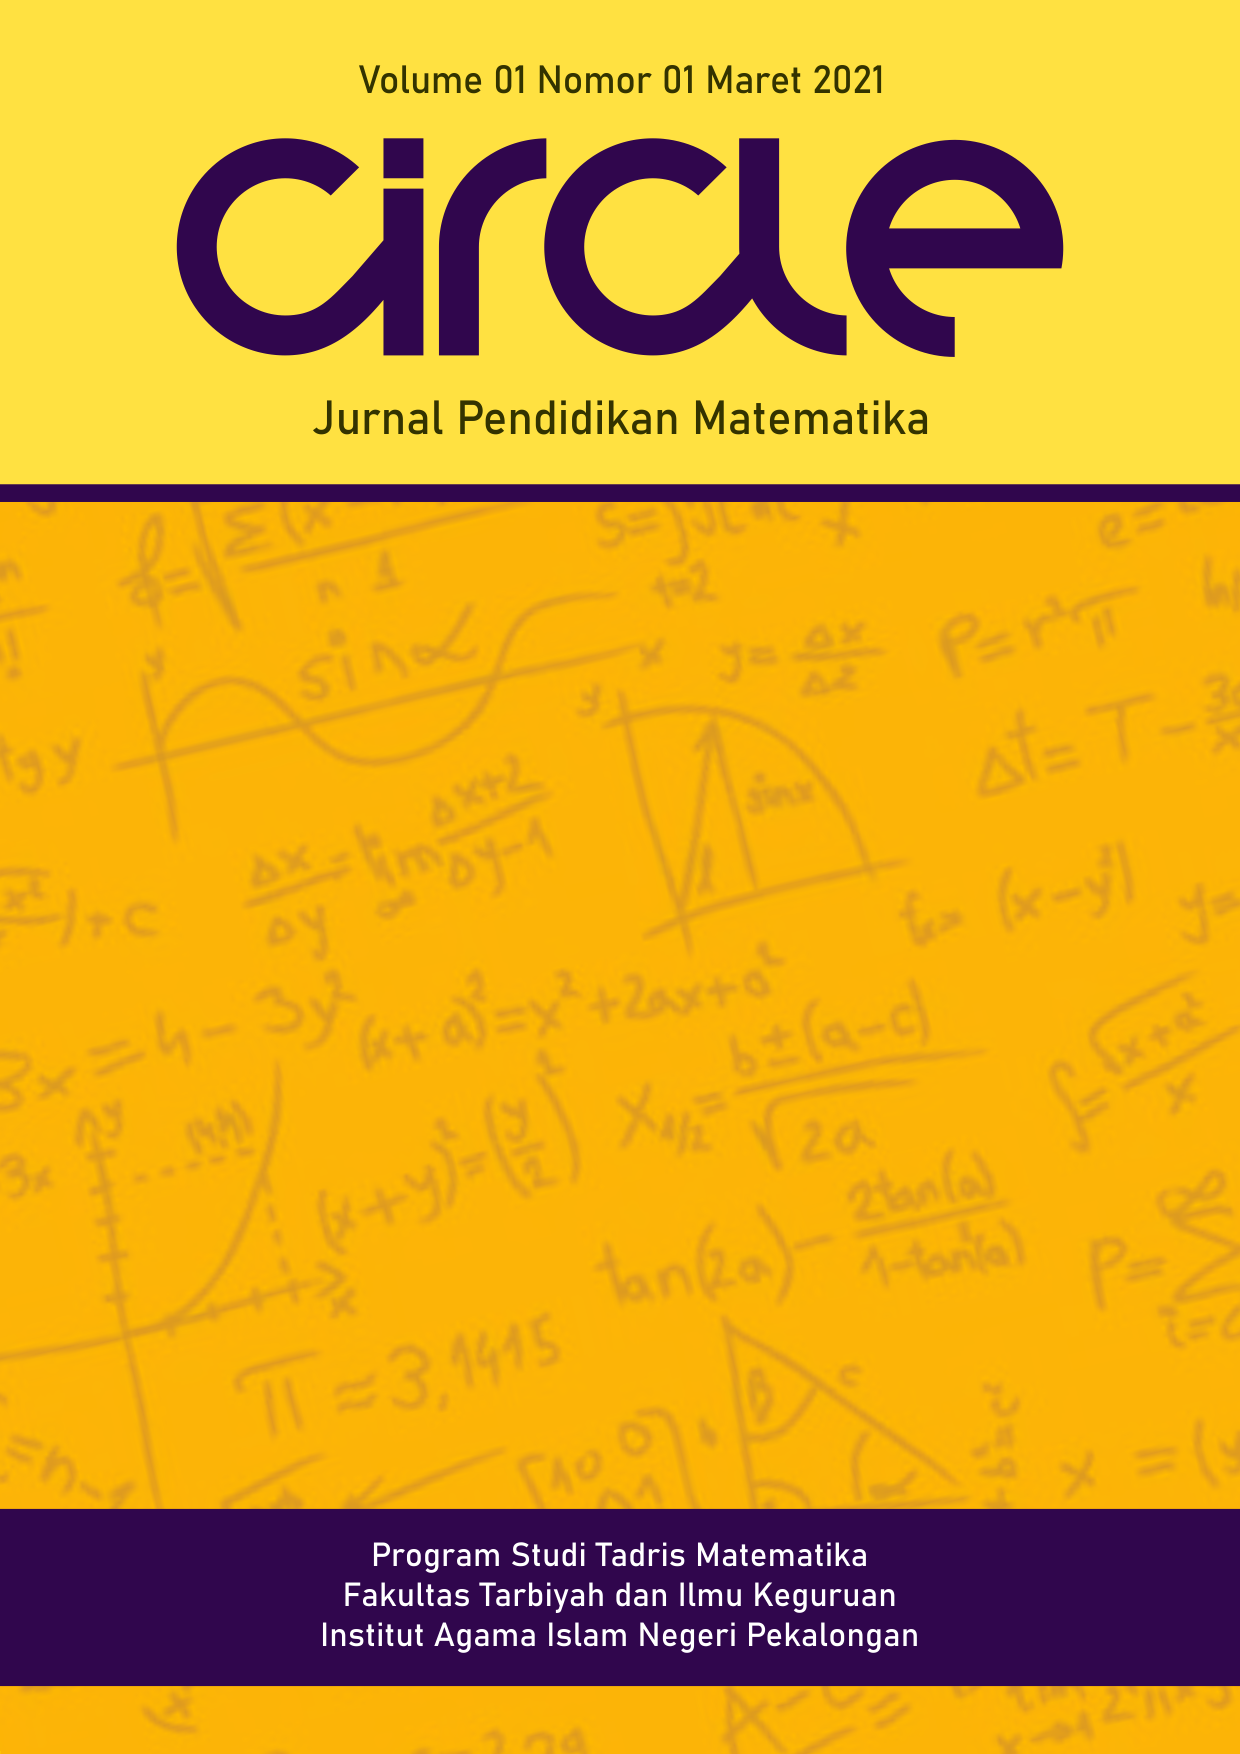 Circle: Jurnal Pendidikan Matematika (p-ISSN 2776-6268, e-ISSN 2777-1008) is a scientific, peer-reviewed and open-access journal which has been established for the dissemination of state of the art knowledge in the field of mathematics education. Author can be lecture, teacher, reseacher, and even student. We recommend a qualitative research, an action research, research and development (RnD), experiment and quantitative research. This journal managed and published by Mathematic Education Department (Tadris Matematika), Fakultas Tarbiyah dan Ilmu Keguruan, UIN K.H. Abdurrahman Wahid Pekalongan, Indonesia.